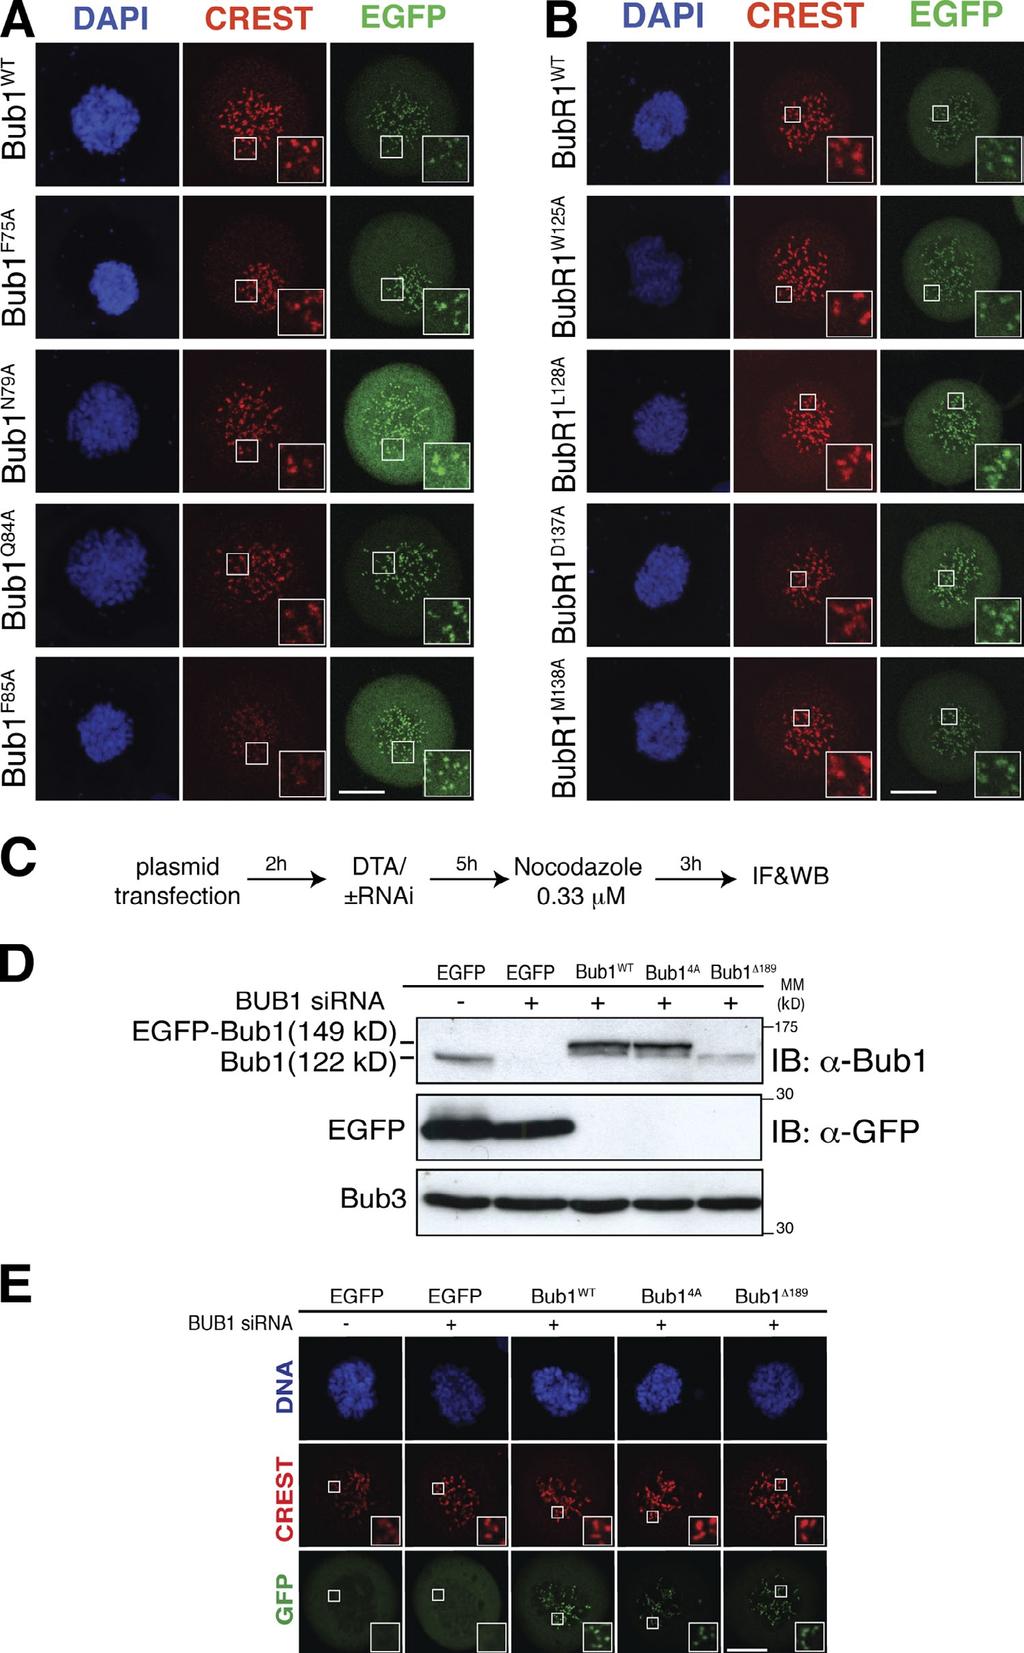 Figure S3. Fluorescence images of mitotic cells expressing wild-type Bub1 or BubR1 and single point mutants and localization experiments in the absence of endogenous Bub1.